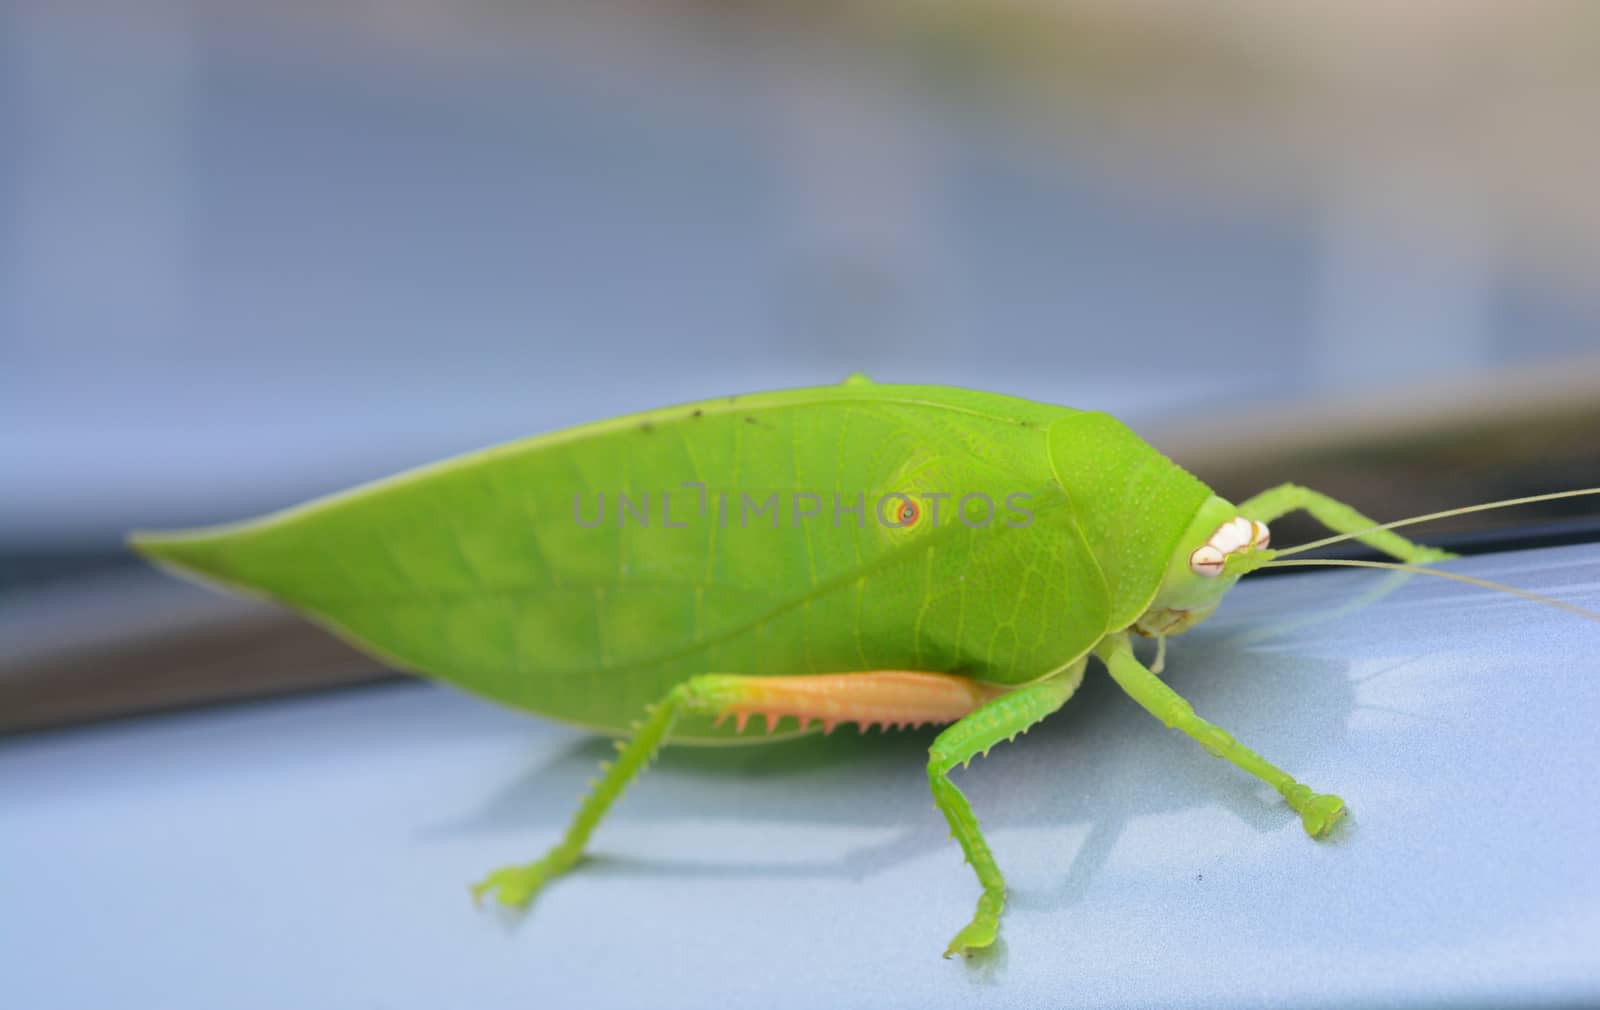 Pseudophyllus titans or giant leaf katydid (giant leaf bug) ** note select focus with shallow depth of field

